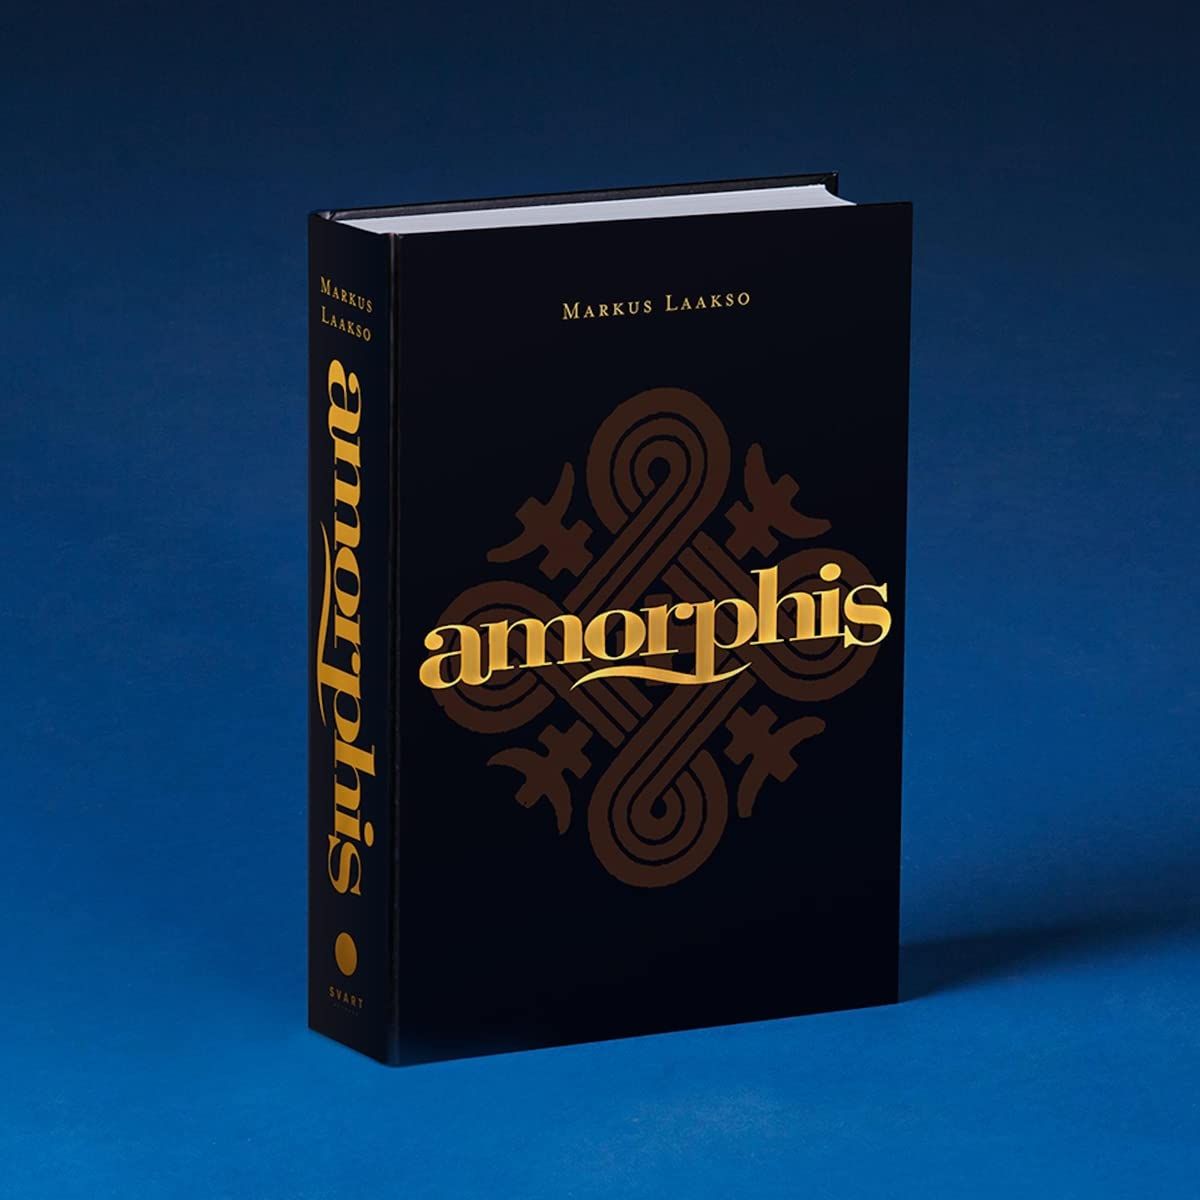 Könyv Amorphis The Official Biography Markus Laakso